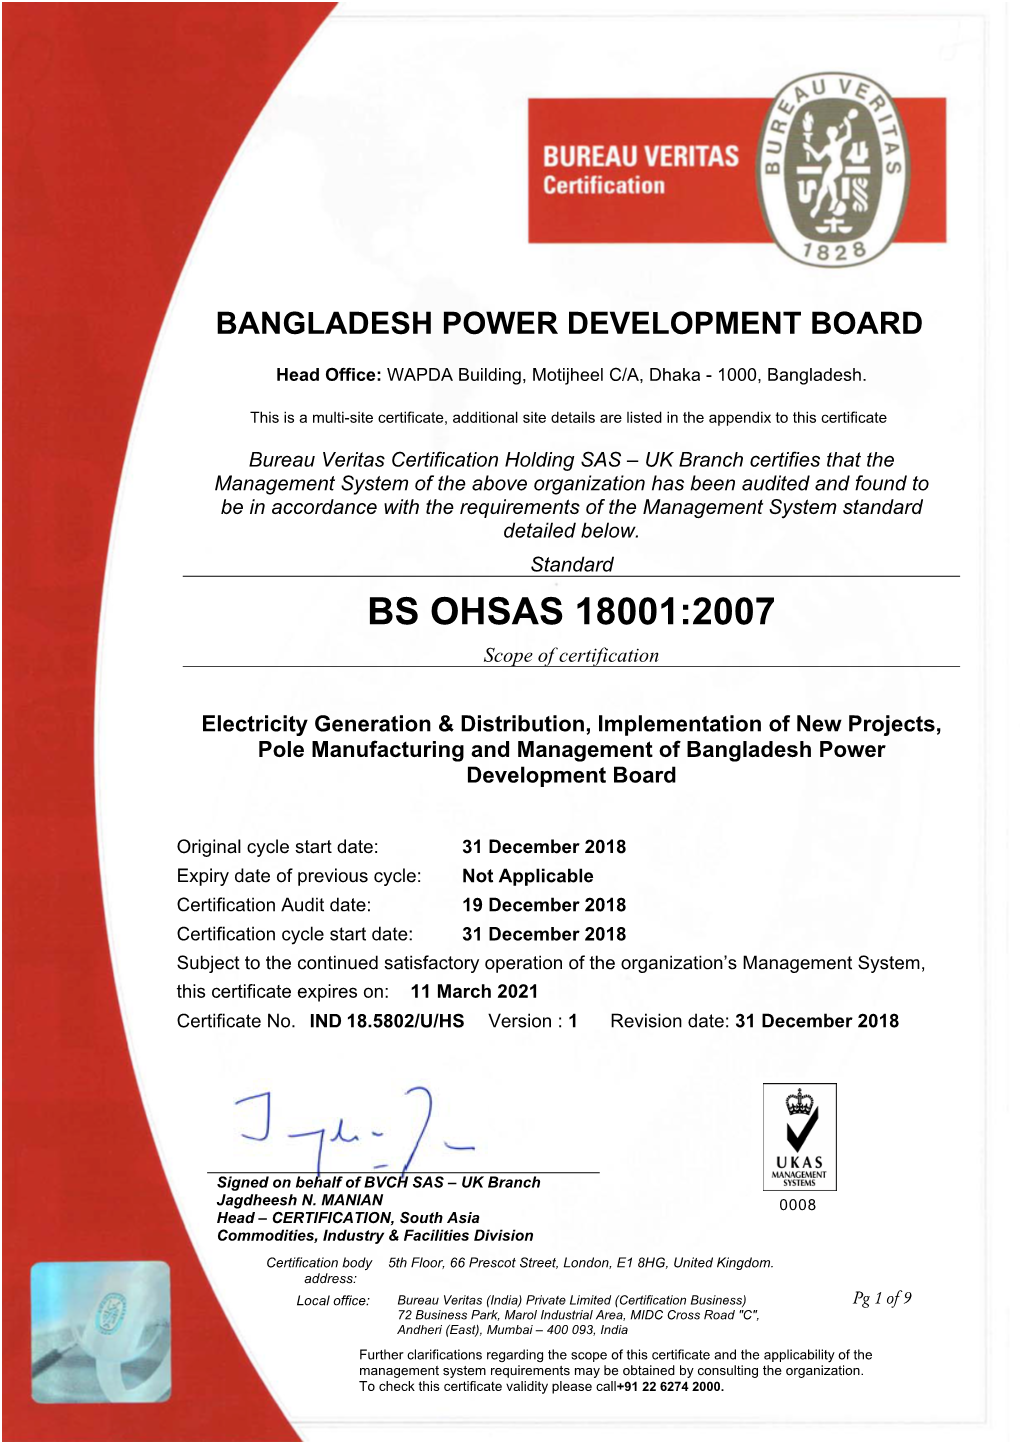 BS OHSAS 18001:2007 Scope of Certification